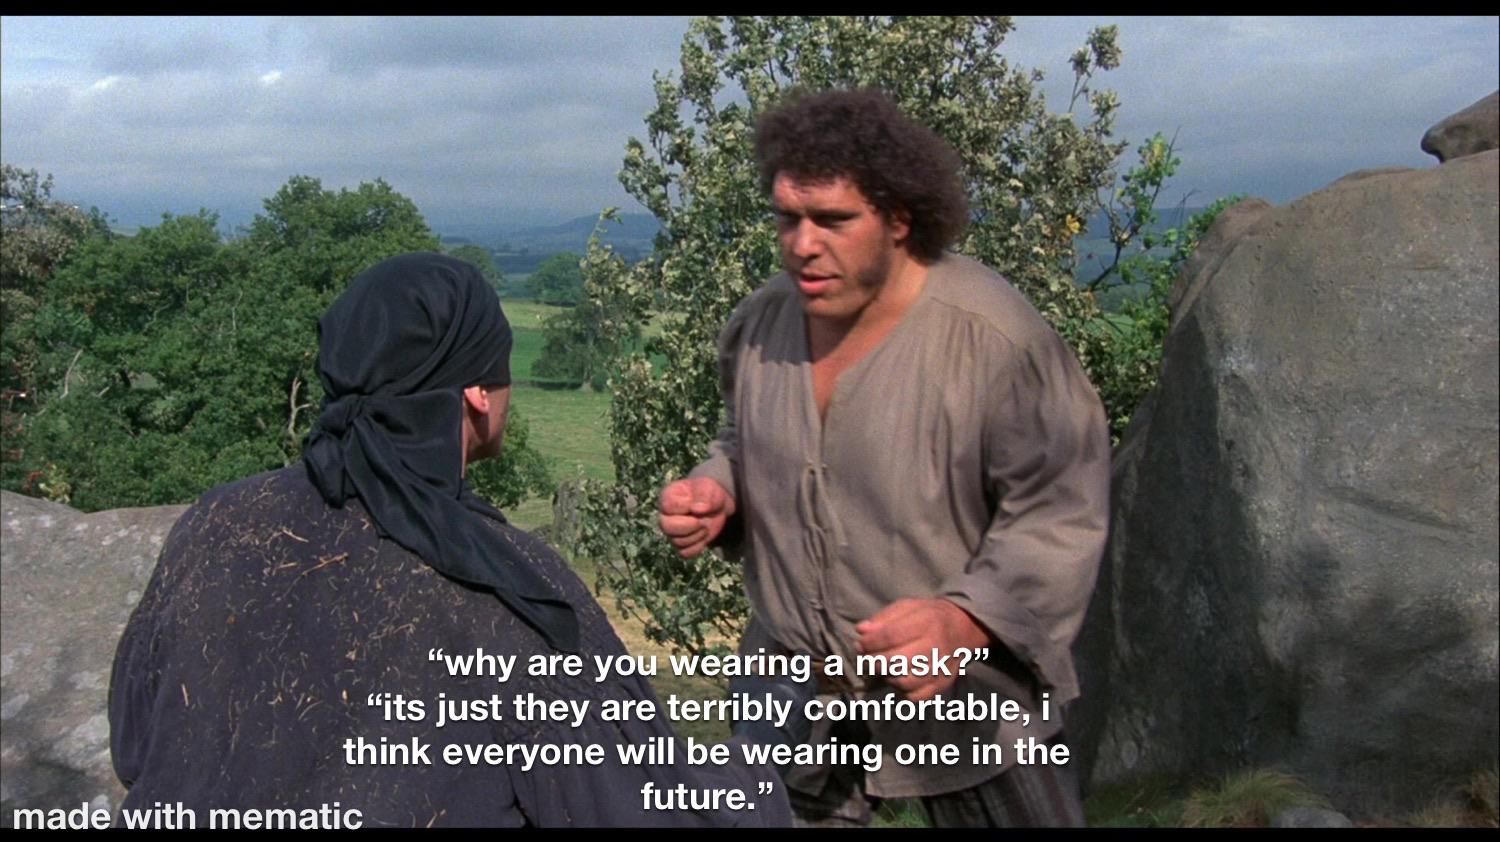 sorry if this has already been done, im watching The Princess Bride, it struck me hilarious.